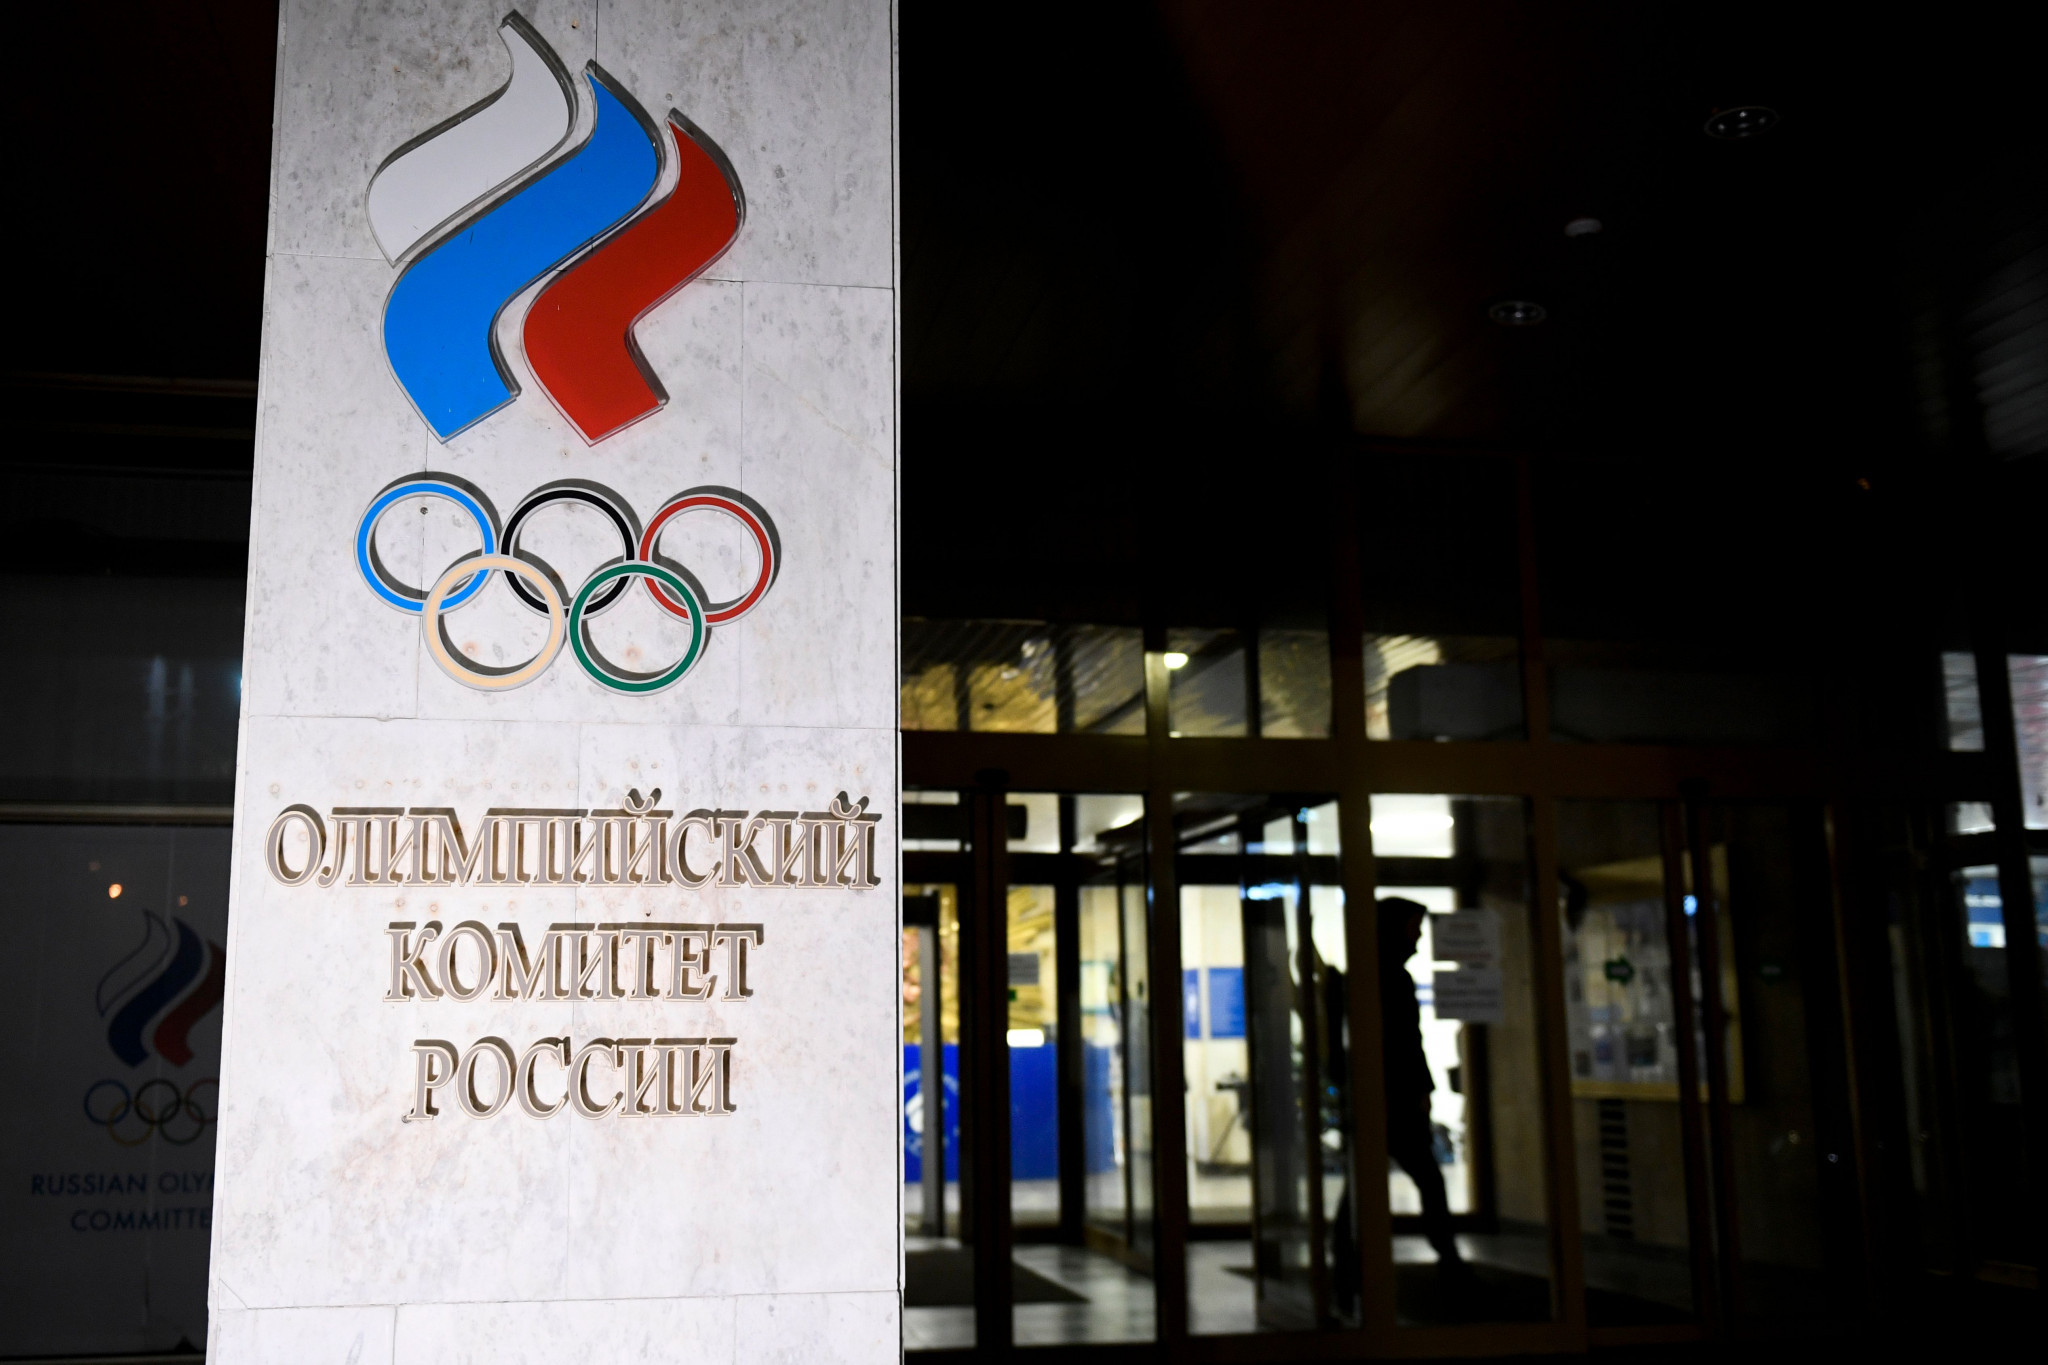 The Russian Olympic Committee has vowed to take legal action against the sanctions ©Getty Images